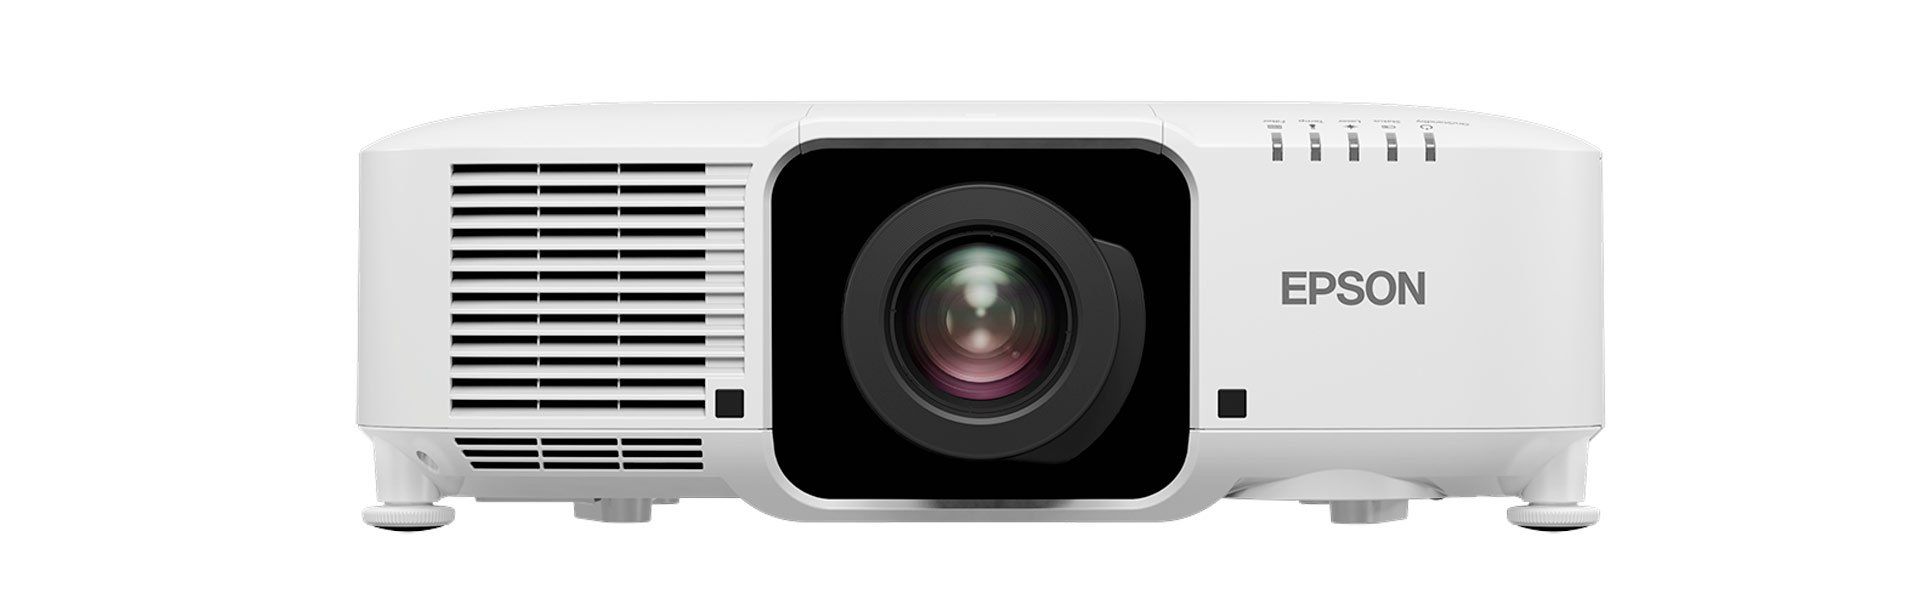 Epson Projectors From Projectorpoint